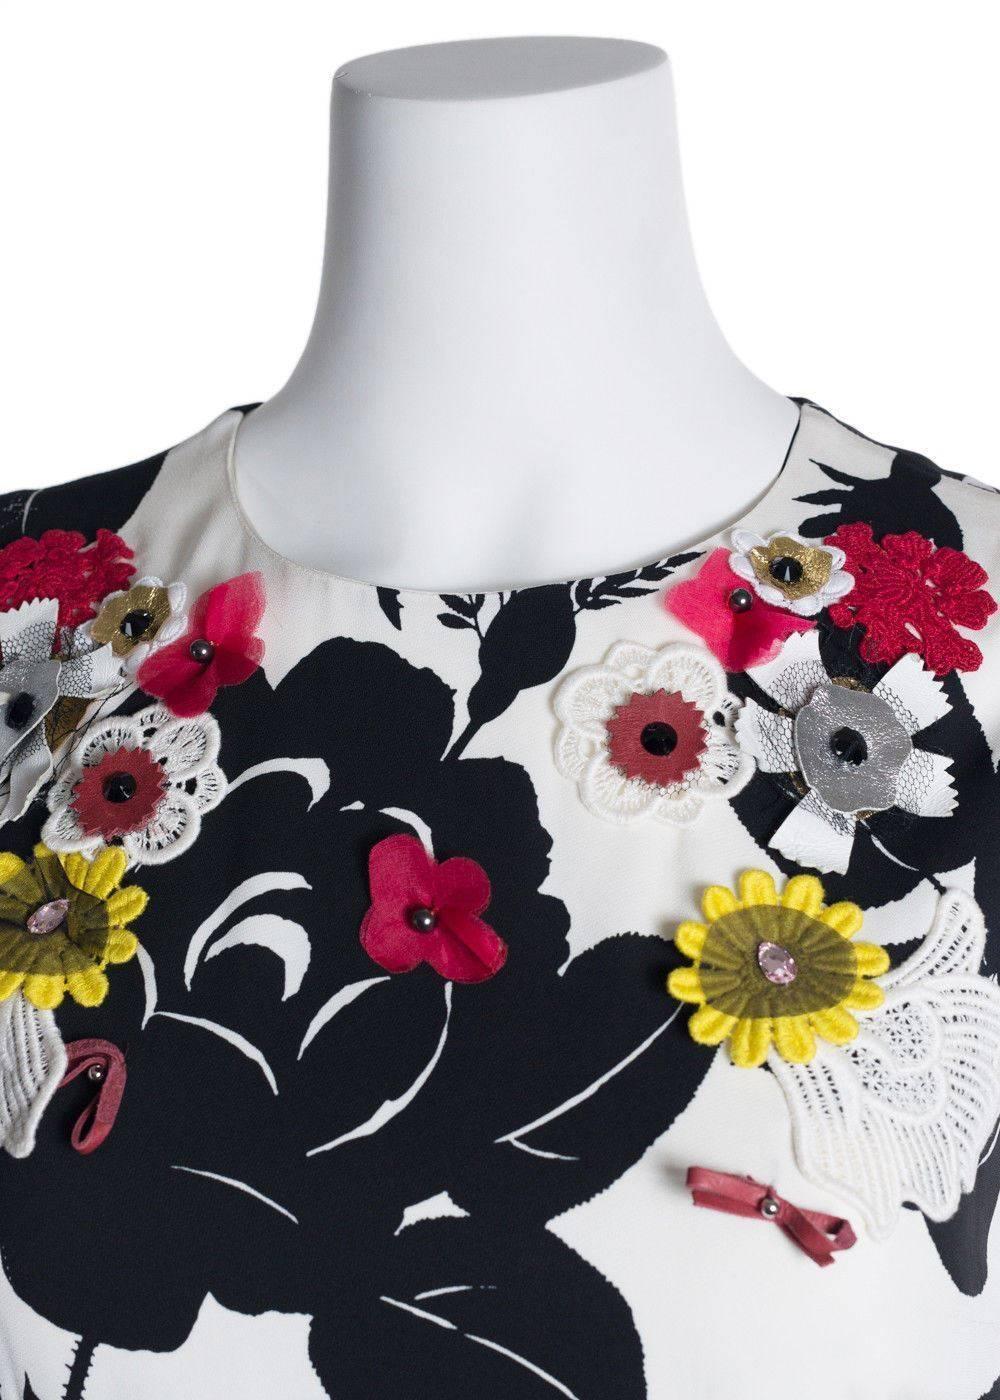 Dolce&Gabbana Black and White Floral Embroidered Sleeveless Dress 1